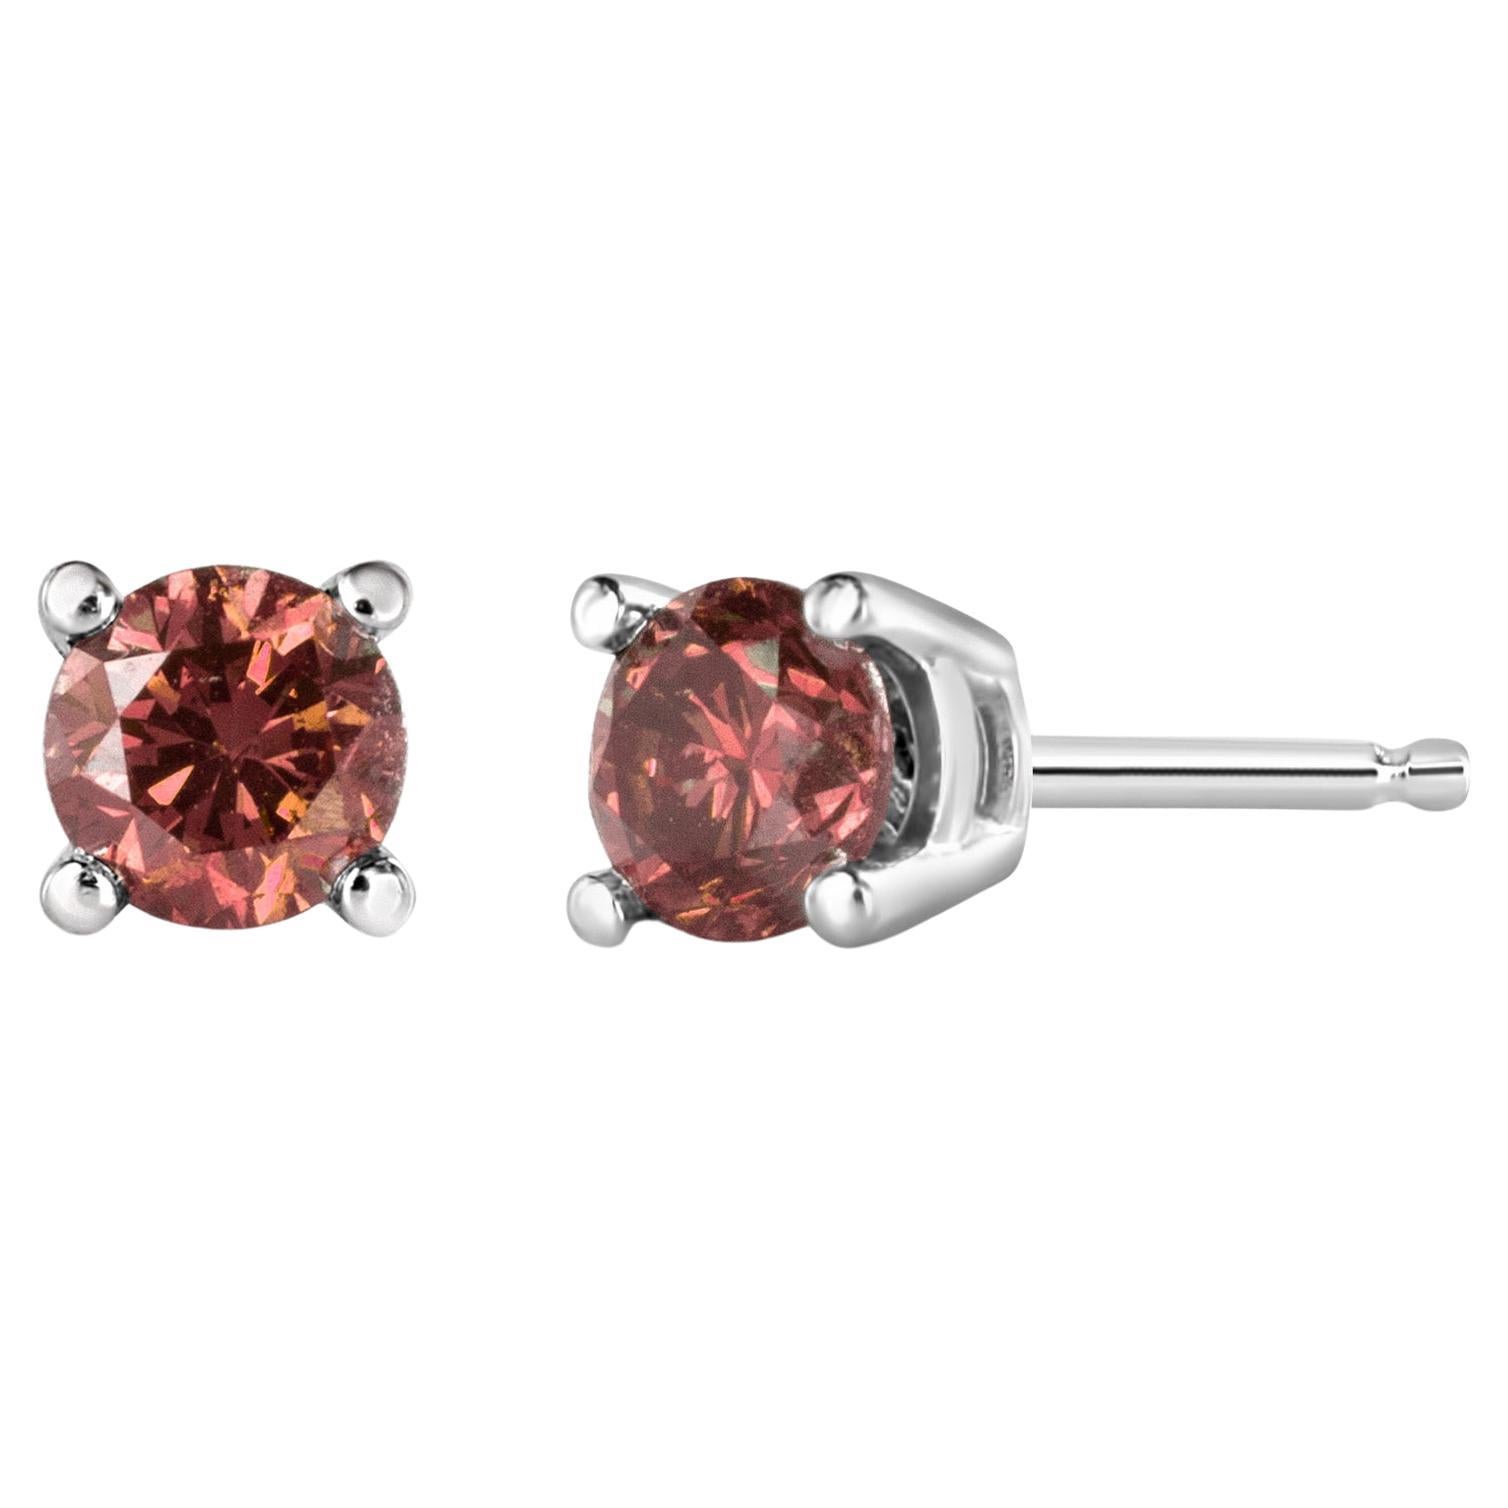 14K White Gold 1/2 Carat Round Brilliant-Cut Pink Diamond Solitaire Stud Earring For Sale